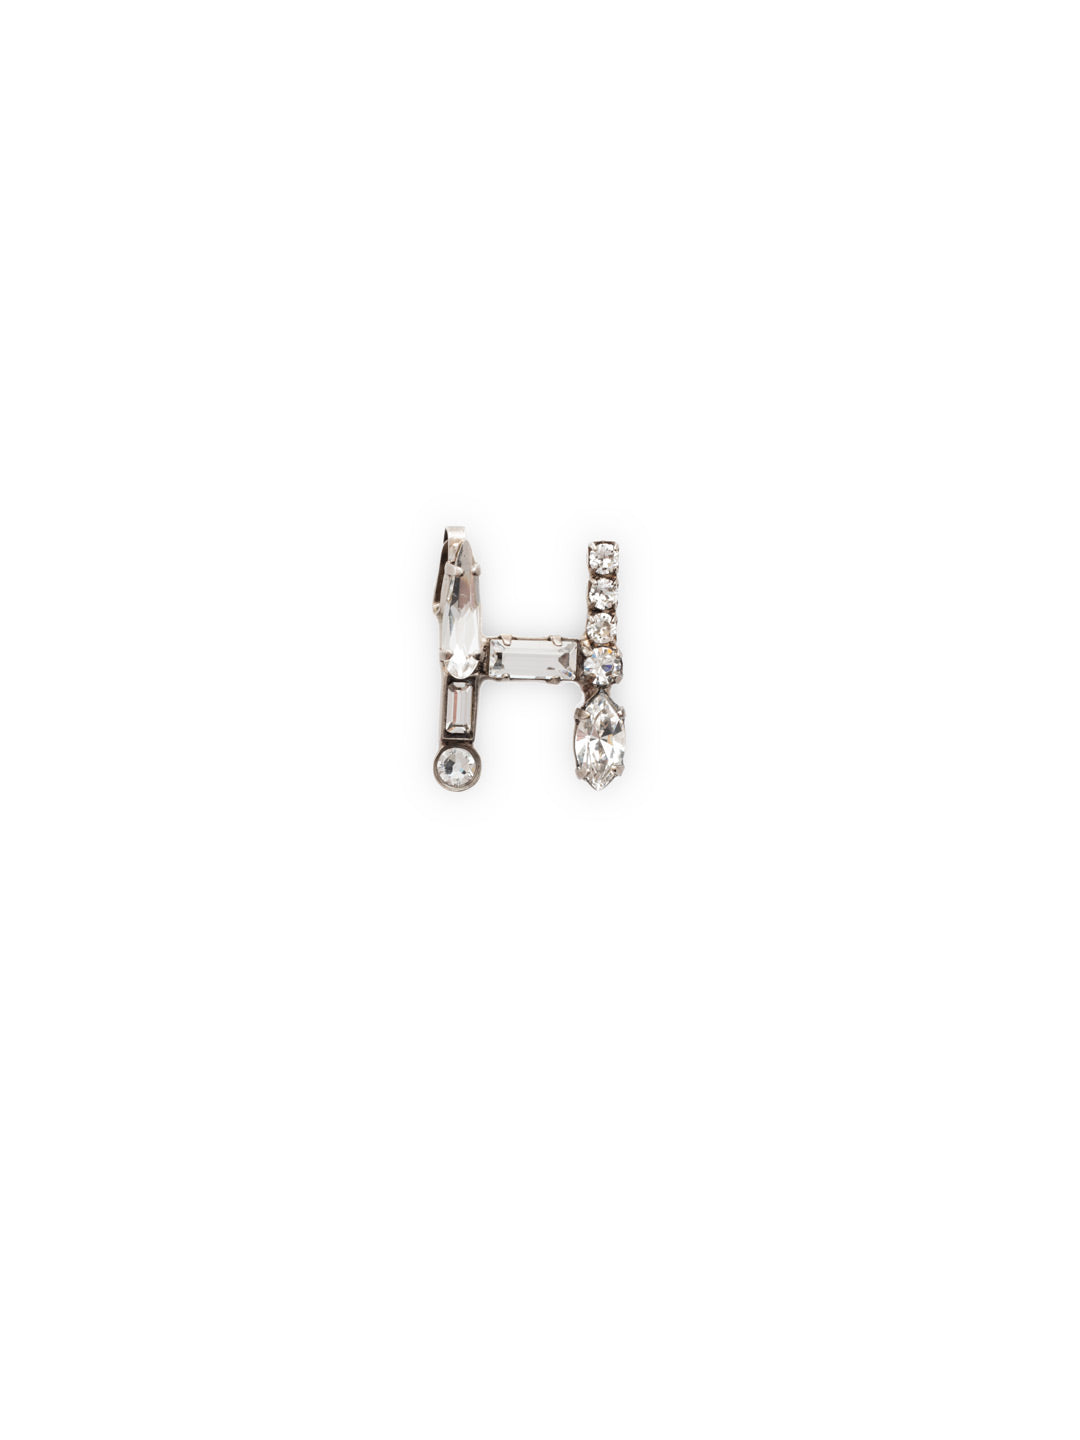 Crystal Charm 'H' Charm Other Accessory - CES15ASCRY